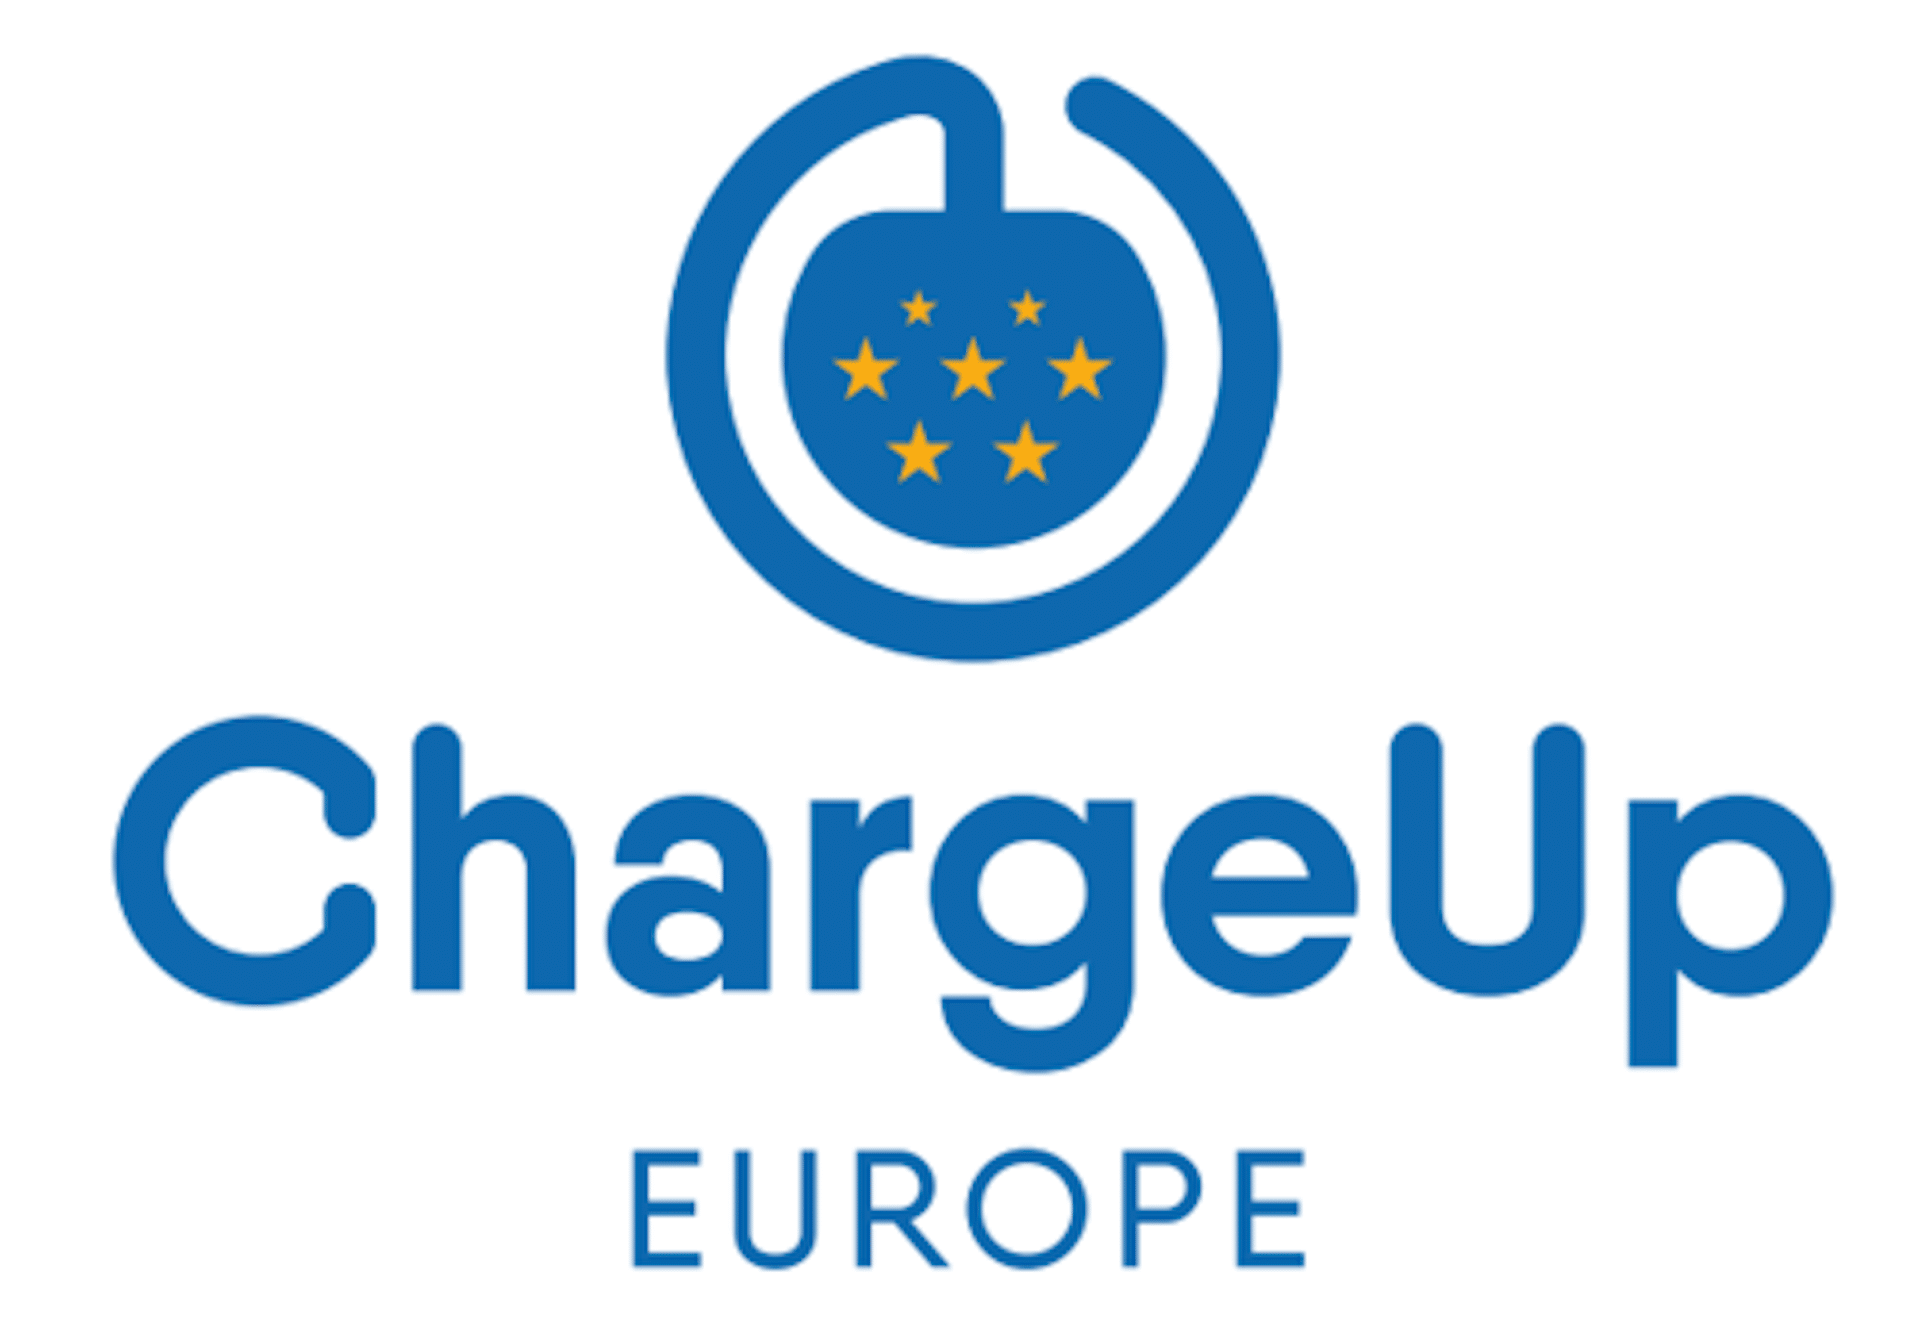 ChargeUp Europe